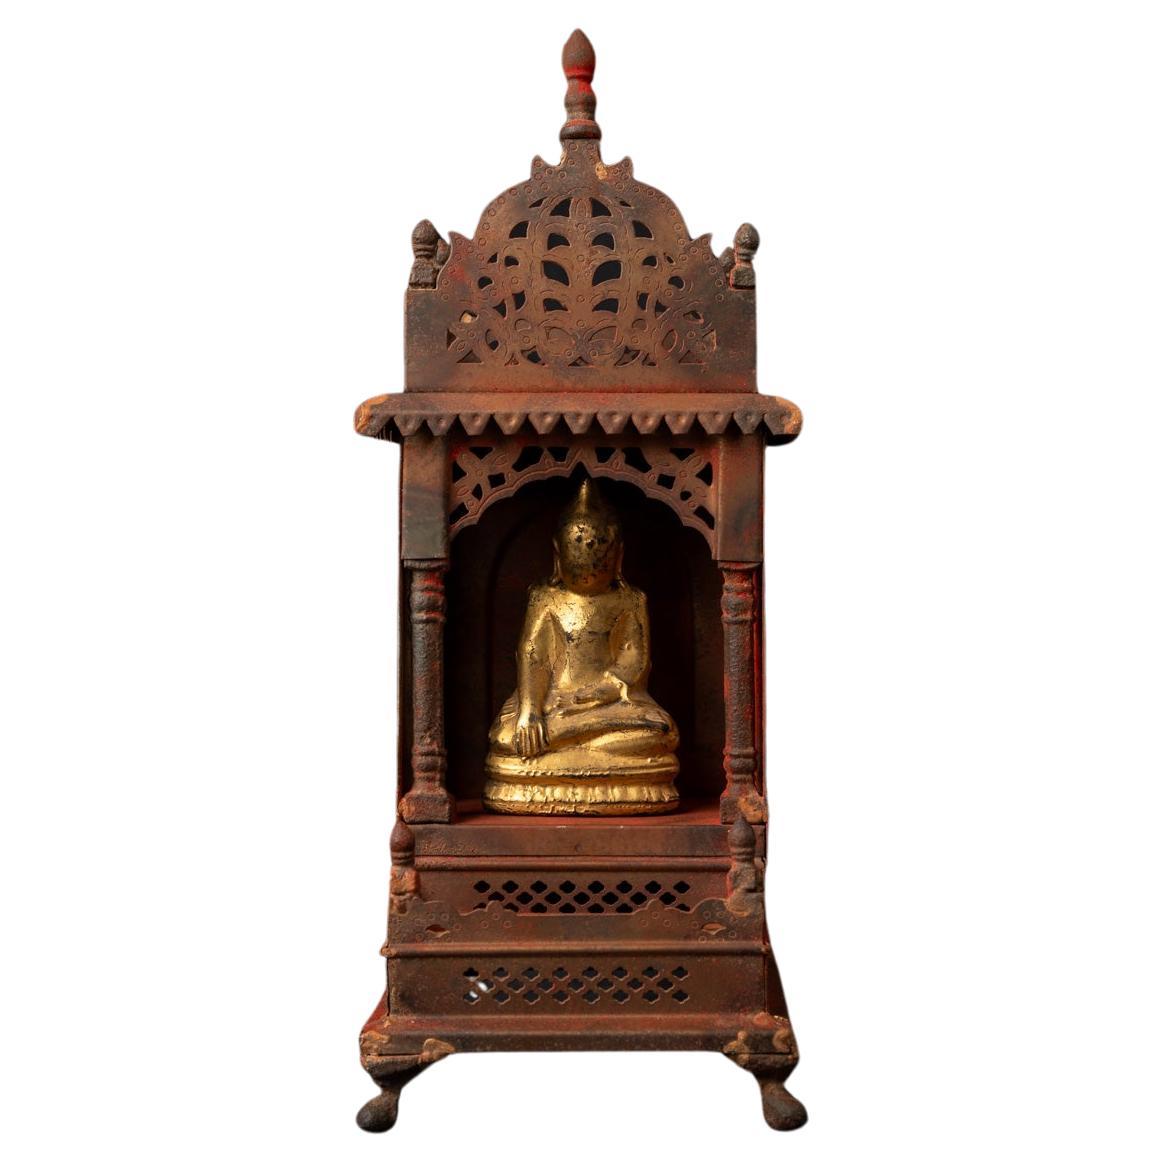 Old metal temple with antique wooden Buddha statue from Nepal